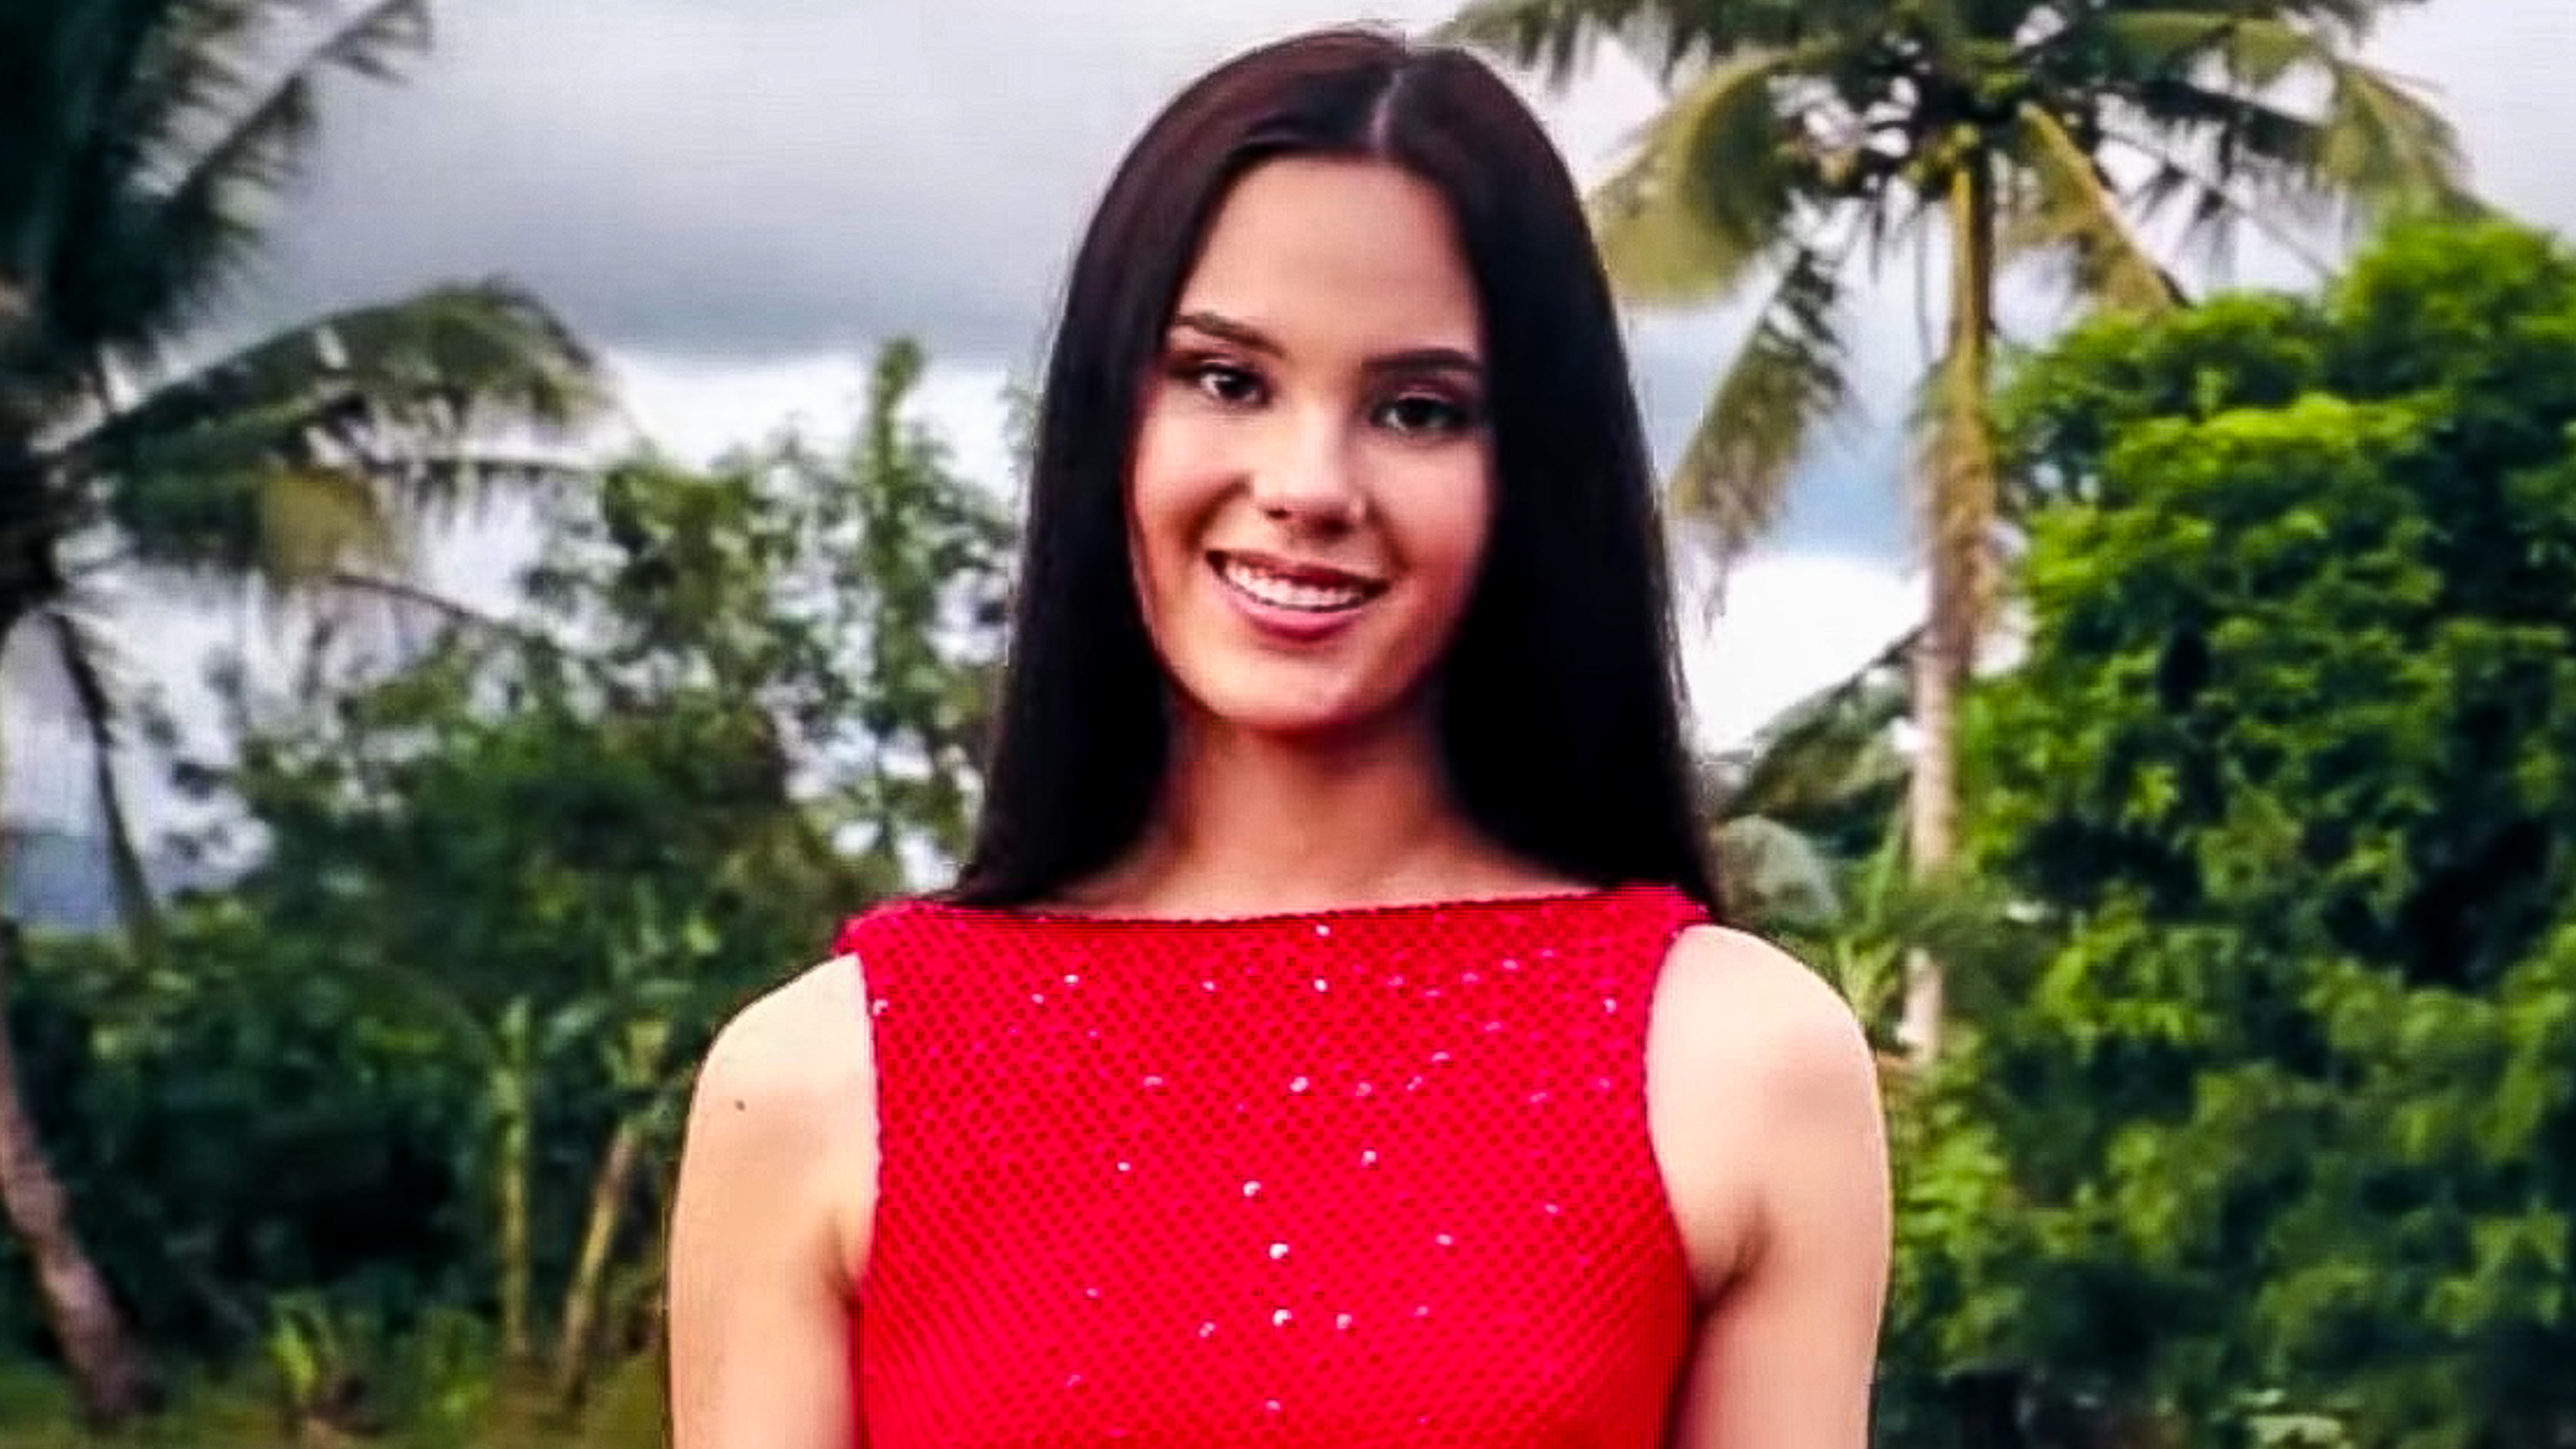 CATRIONA GRAY. Miss World Philippines 2016 Catriona Gray tells her supporters abroad a bit about herself and her country in a video for the international pageant. Screengrab from YouTube/OfficialMissWorld 